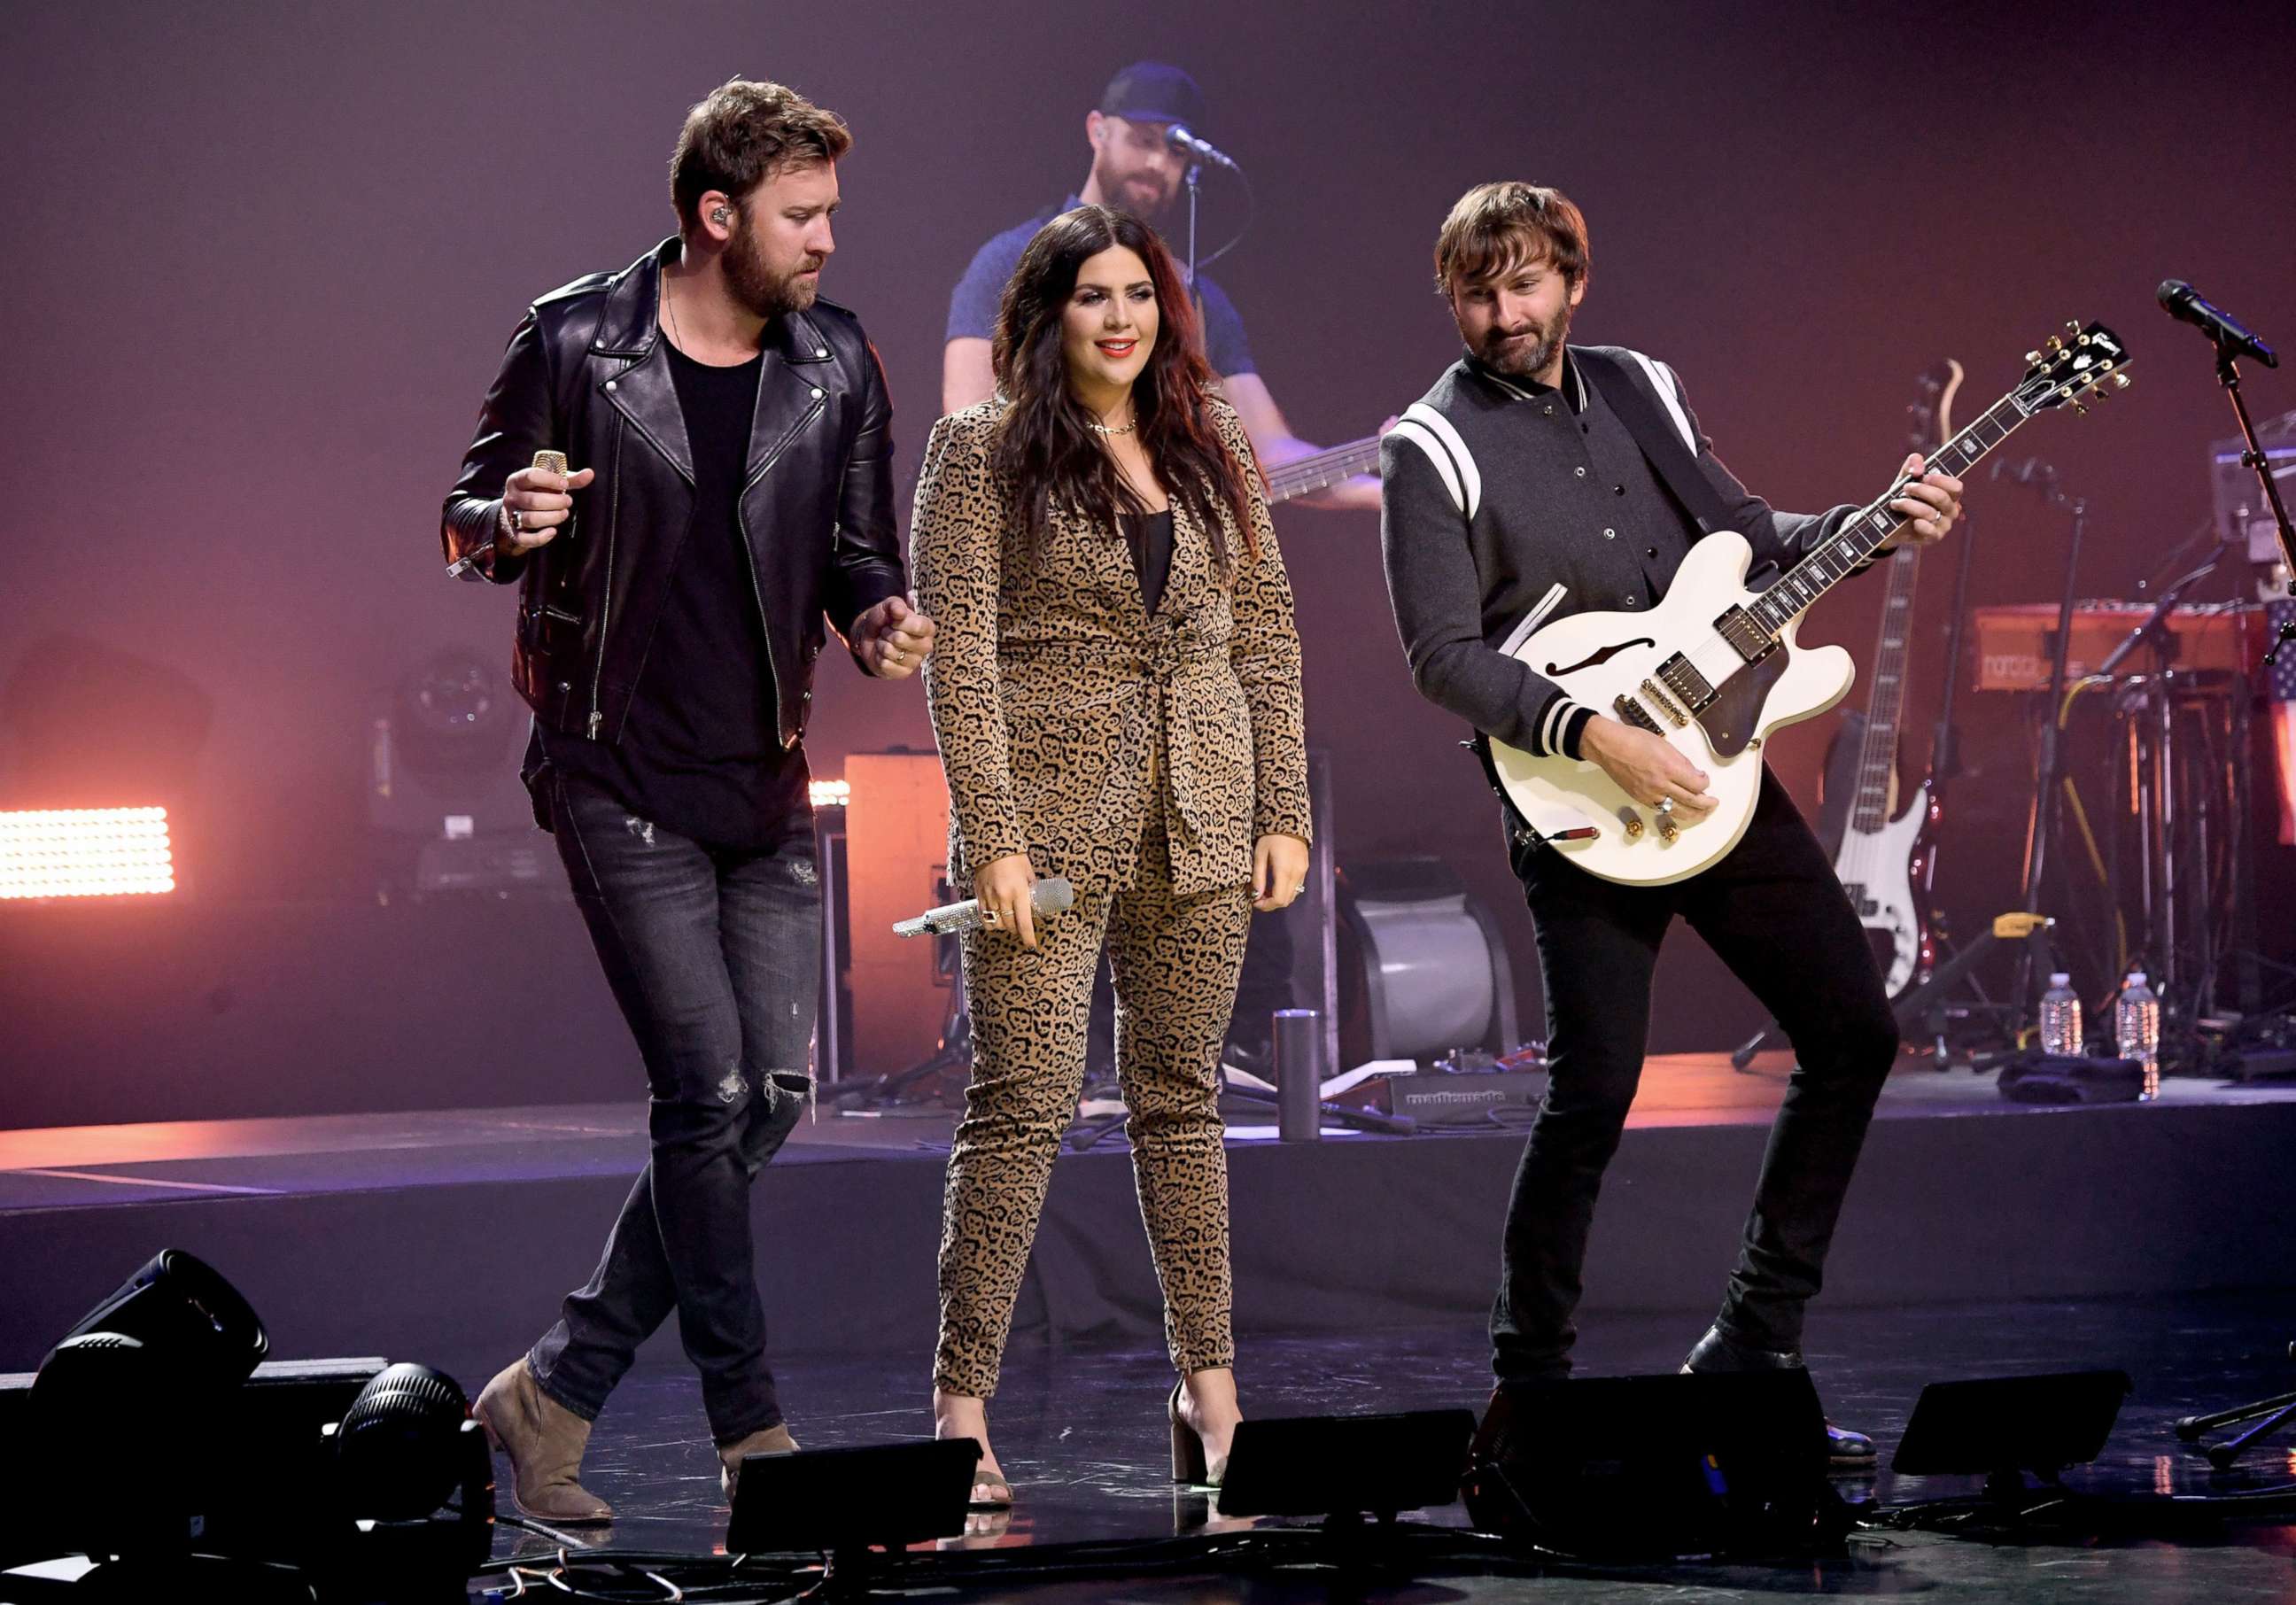 PHOTO: In this Oct. 23, 2020, file photo, Charles Kelley, Hillary Scott, and Dave Haywood of Lady A perform onstage for the 2020 iHeartCountry Festival in Nashville.